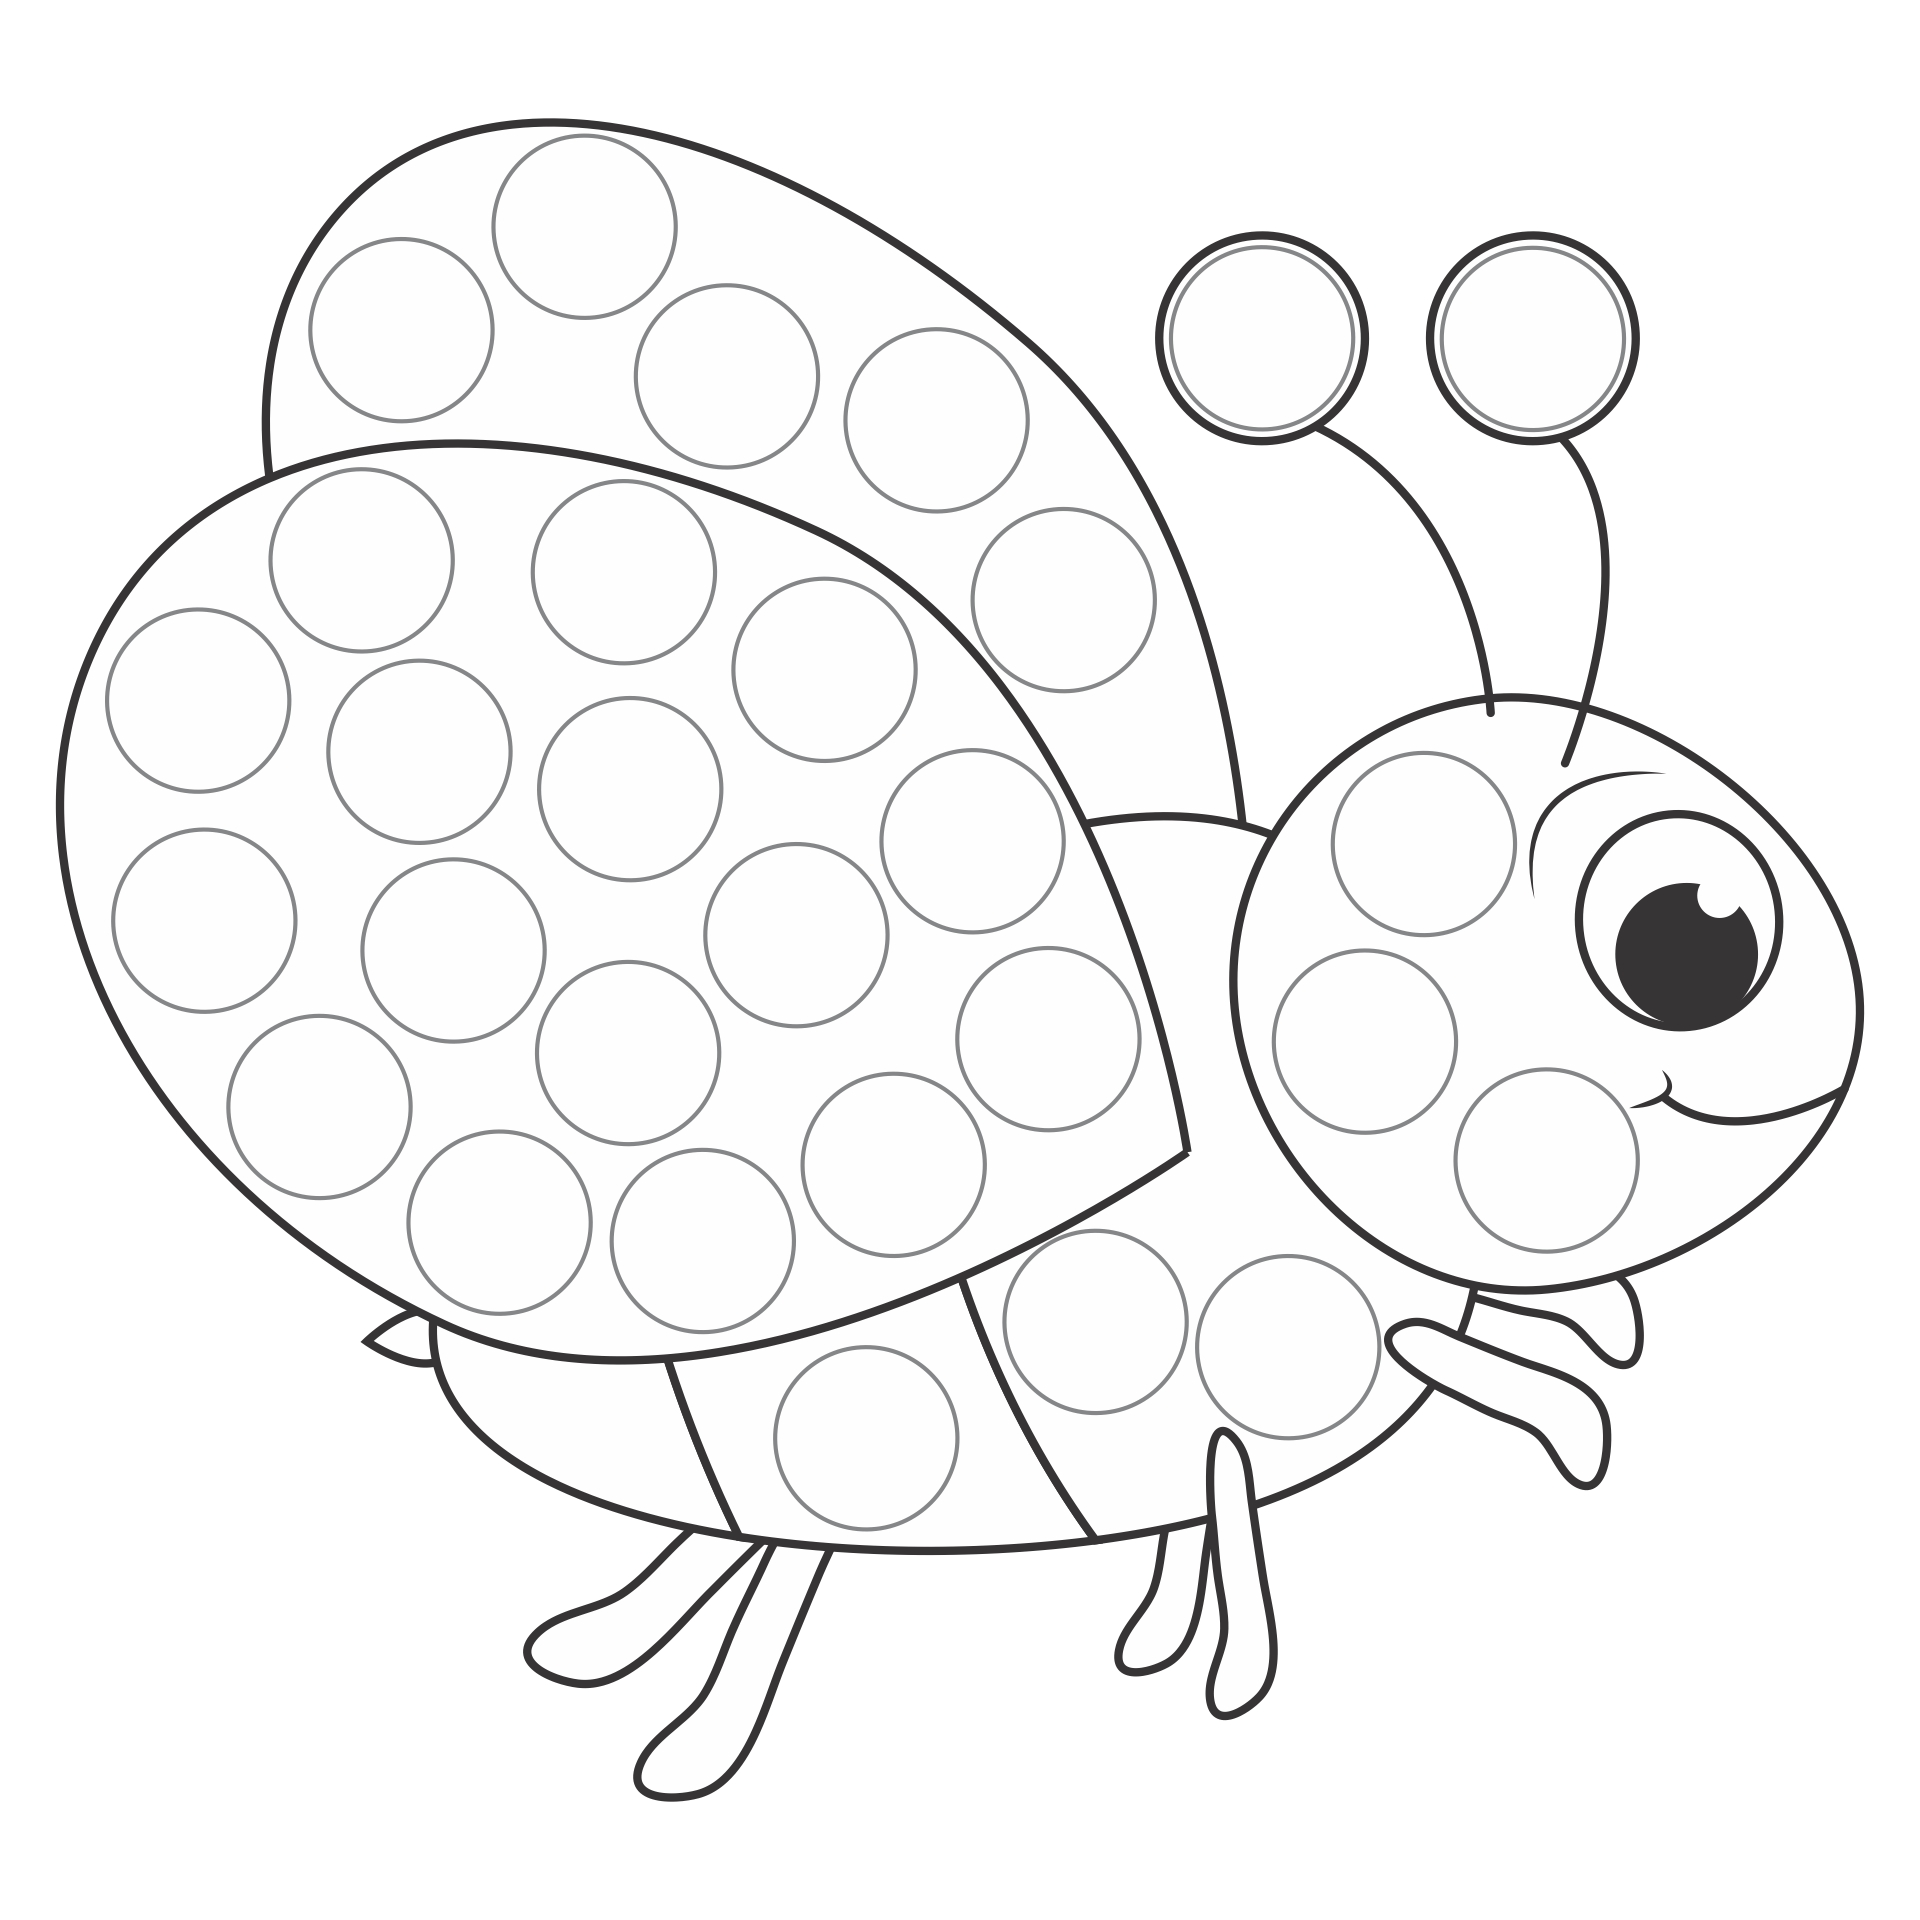 Free Printable Dot To Dot Pictures